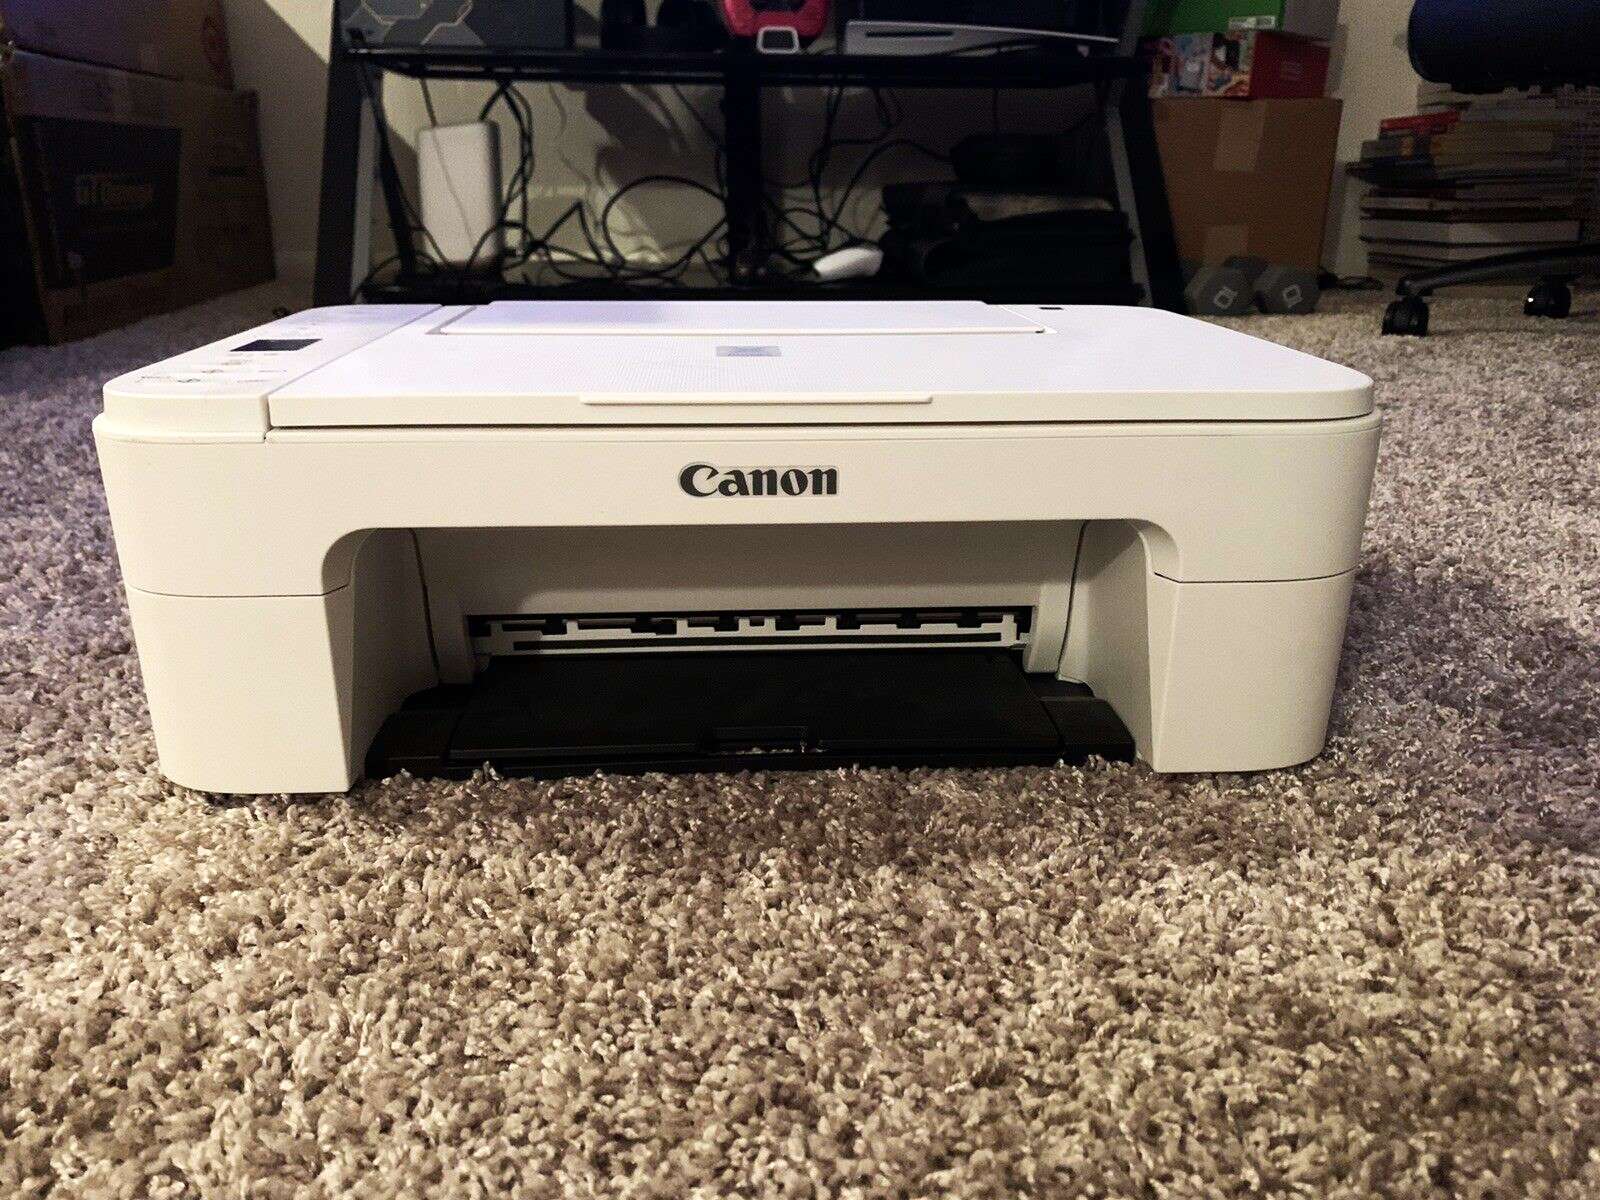 How To Connect Canon Ts3122 Printer To Computer